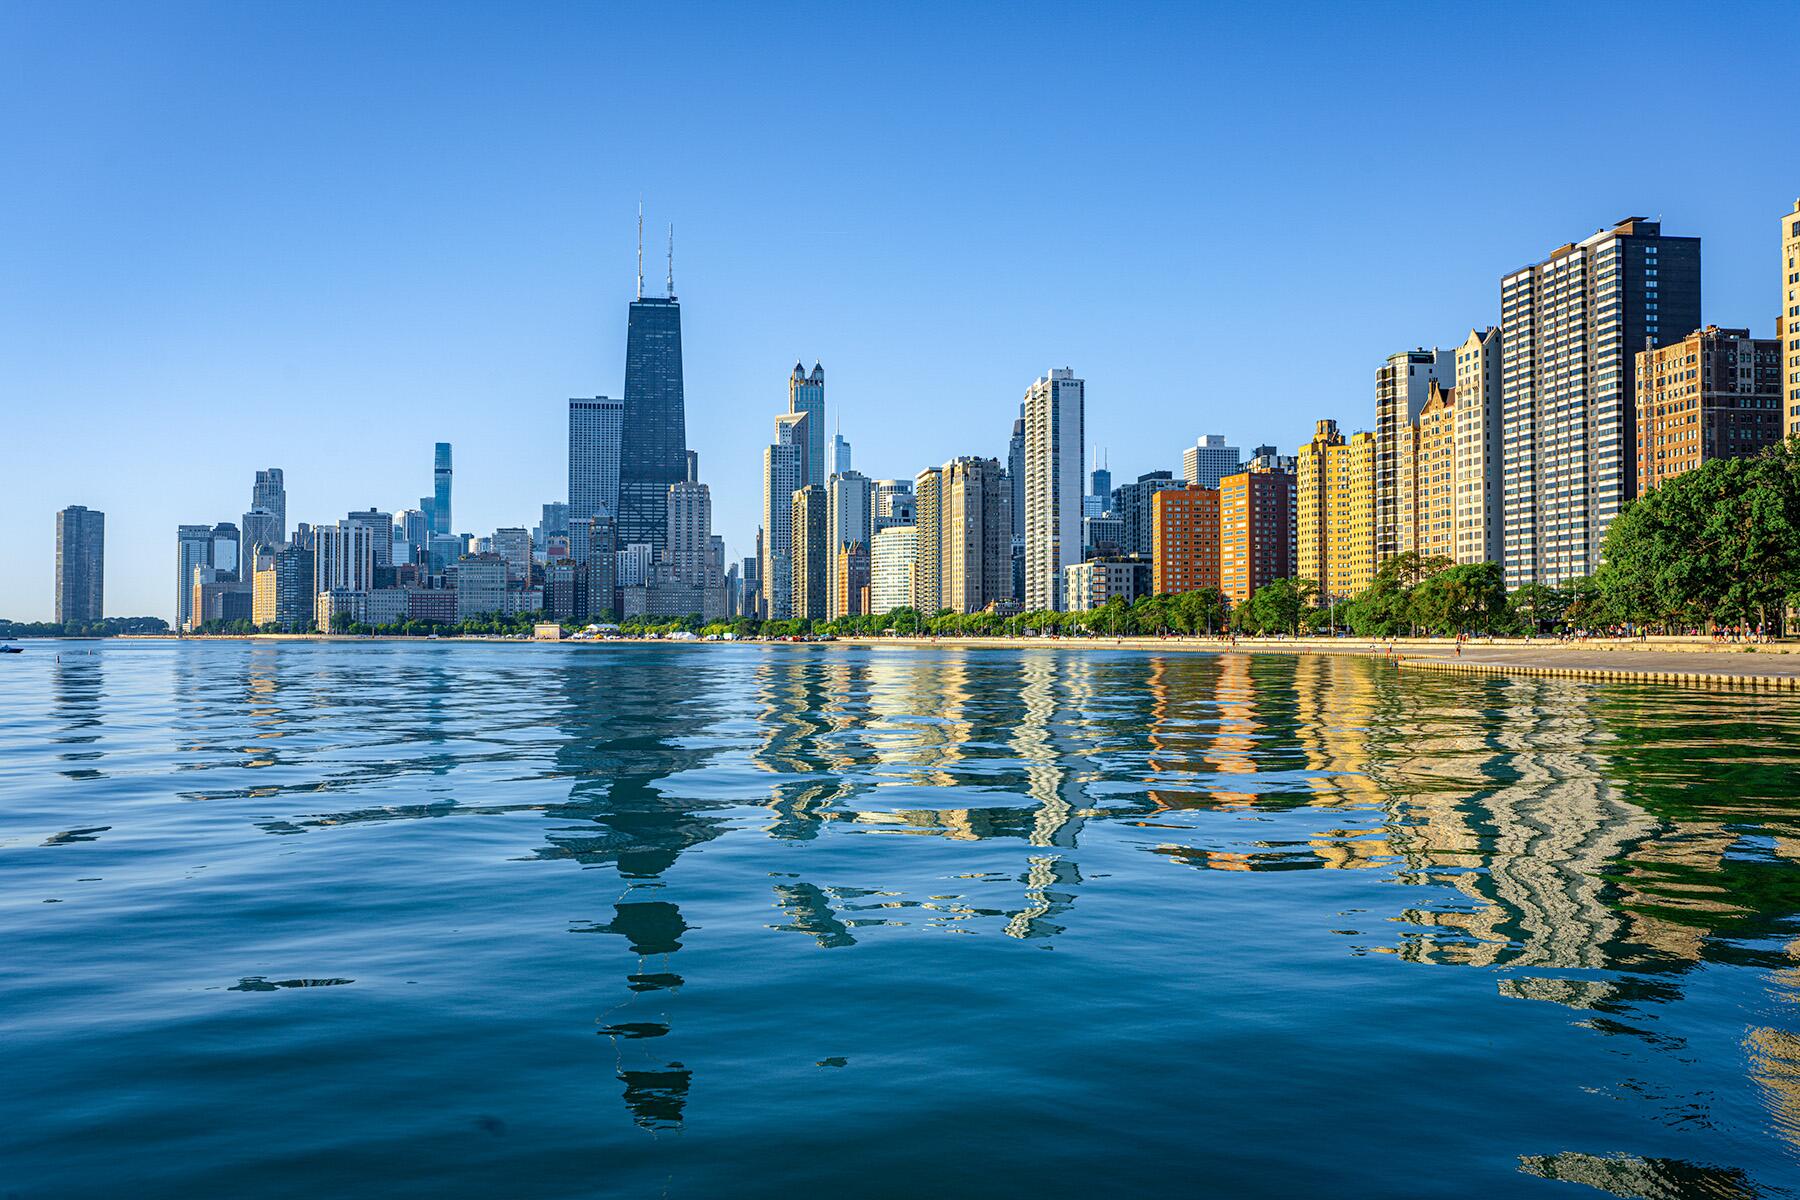 <a href='https://www.fodors.com/world/north-america/usa/illinois/chicago/experiences/news/photos/the-best-ways-to-enjoy-chicagos-lake-michigan-lakefront#'>From &quot;Here's How to Best Experience Chicago's Lakefront&quot;</a>